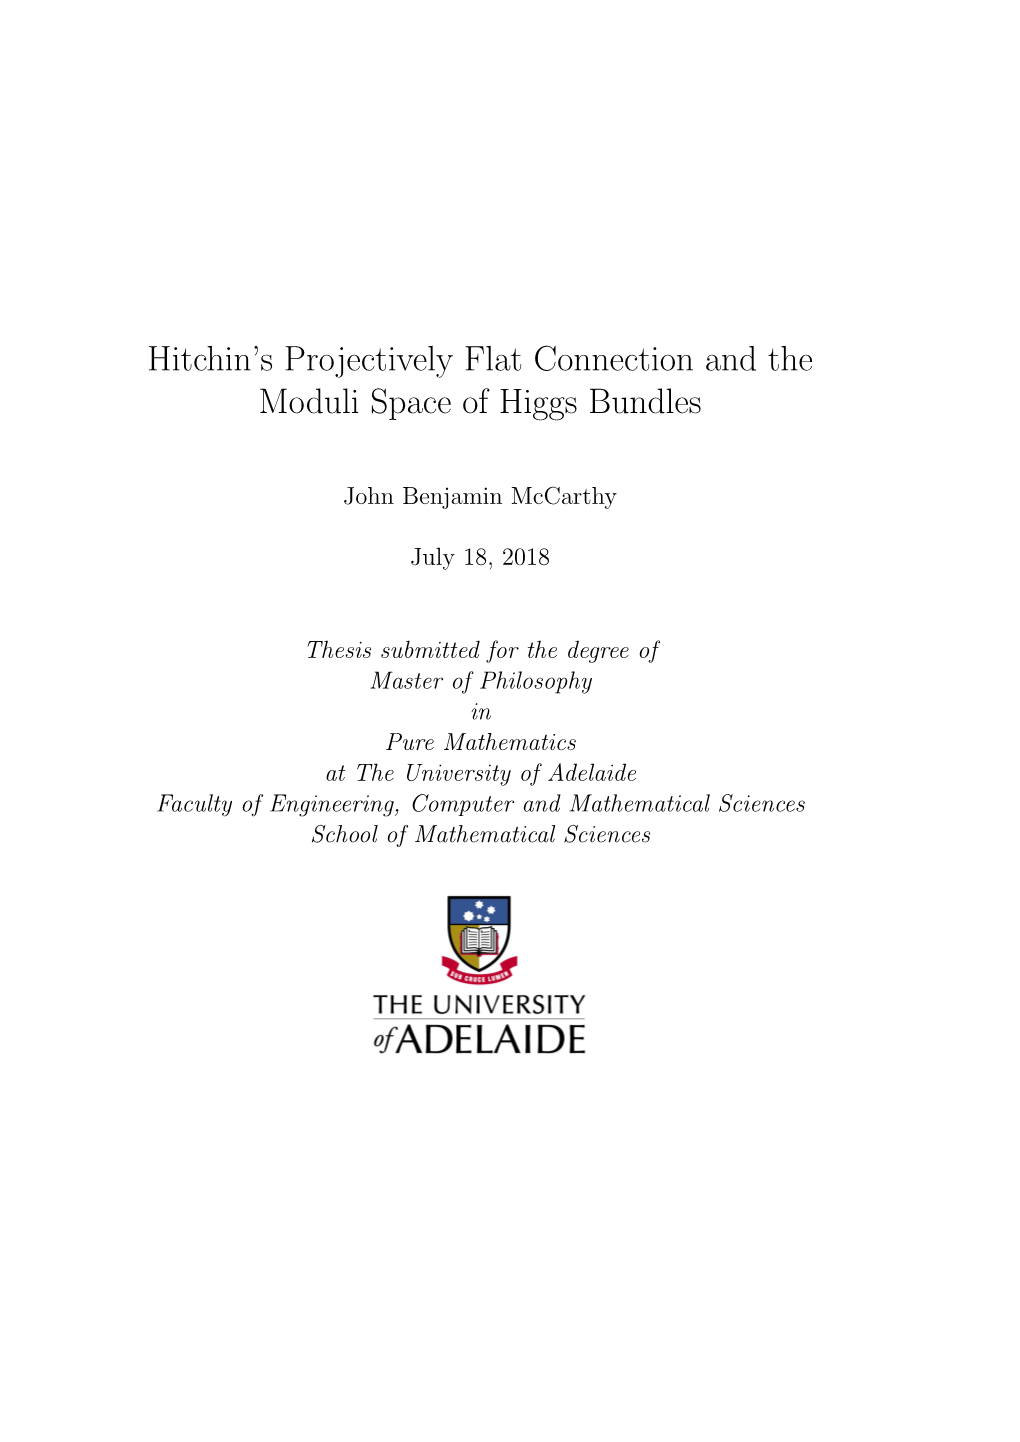 Hitchin's Projectively Flat Connection and the Moduli Space of Higgs Bundles